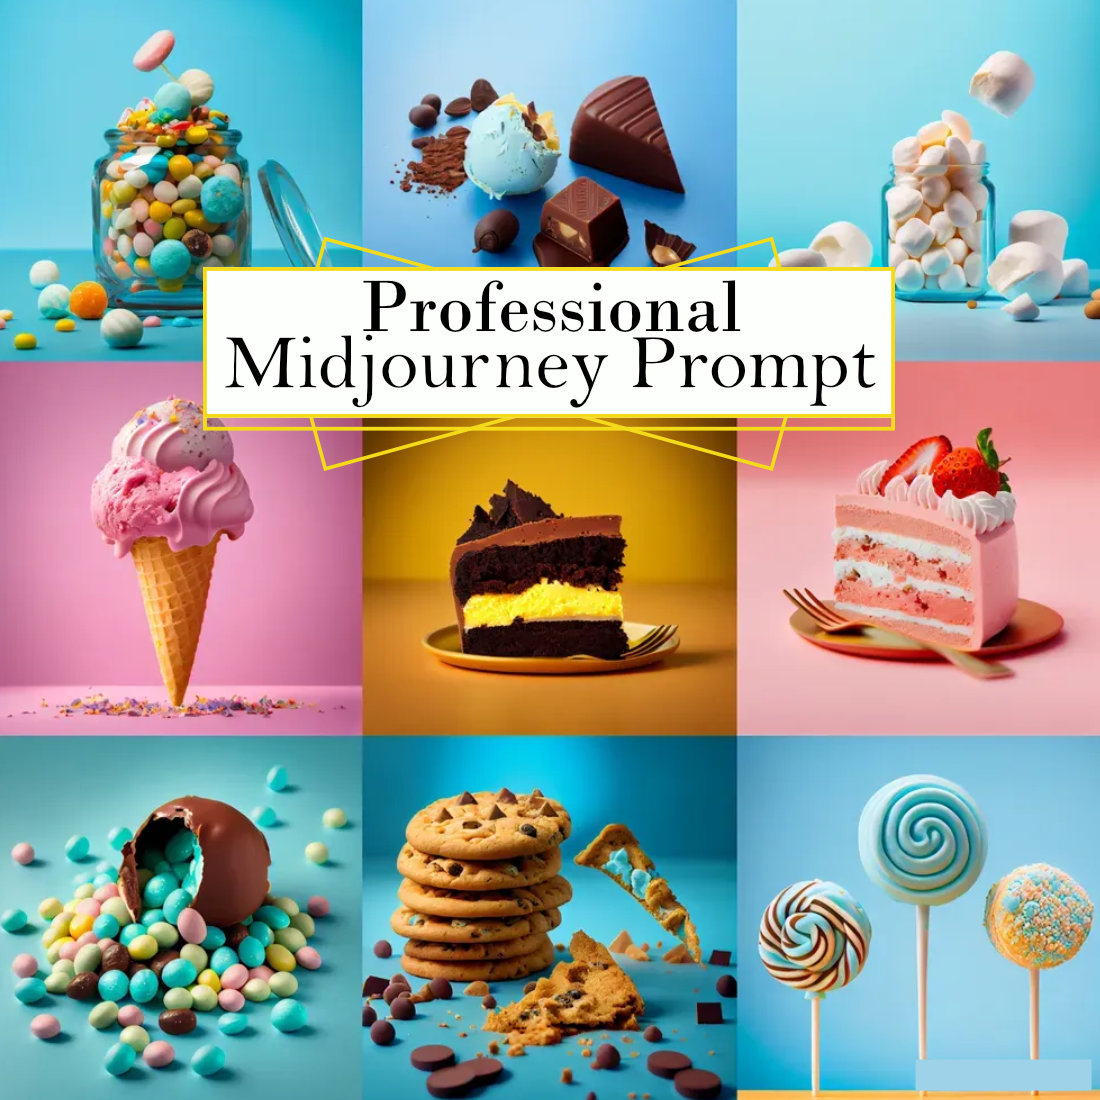 Sweet Foods Photographs Midjourney Prompt cover image.